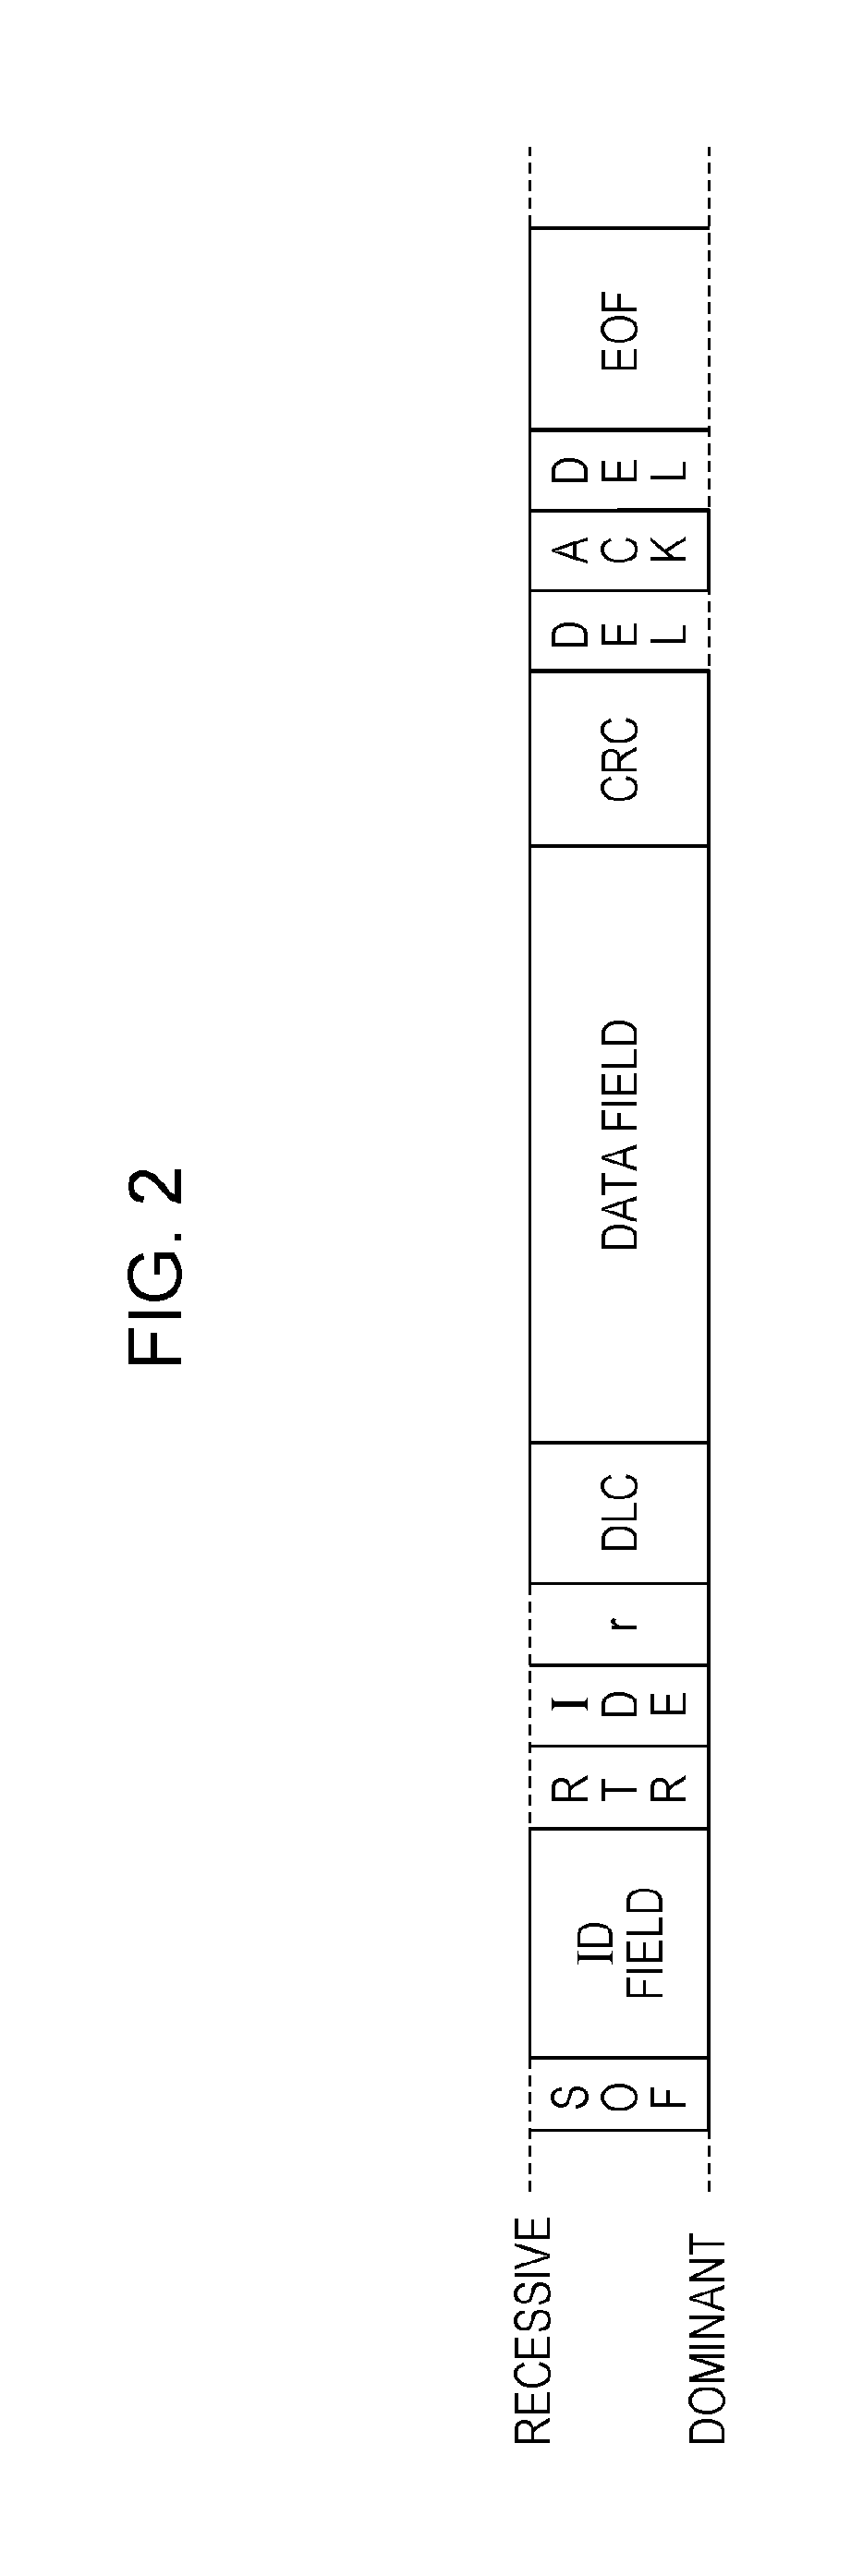 Information processing method, information processing system, and non-transitory computer-readable recording medium storing a program